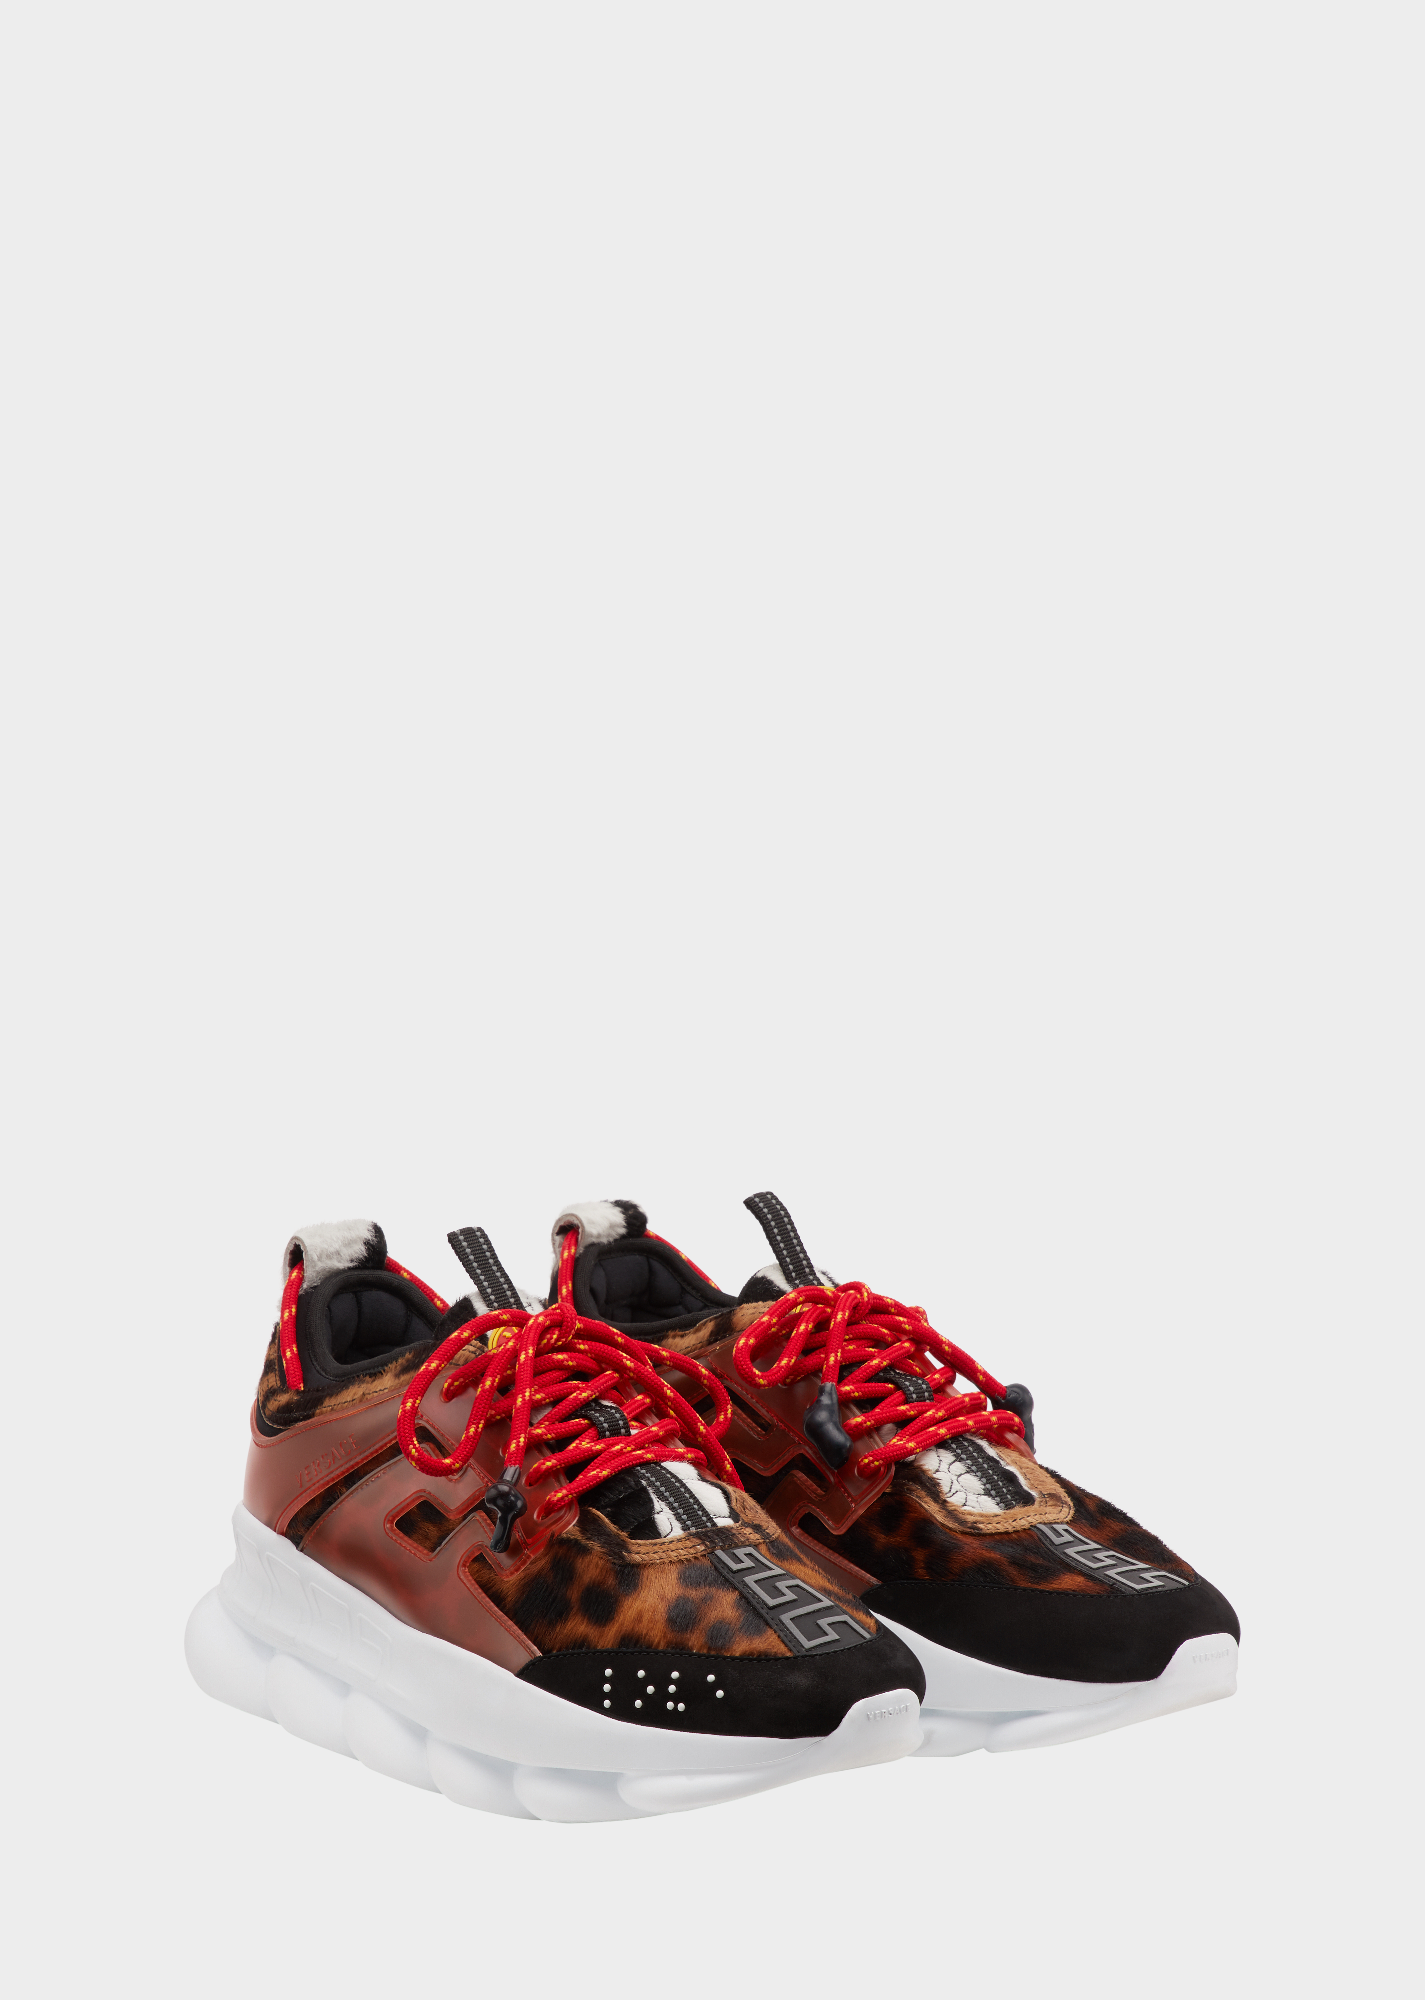 new VERSACE Chain Reaction Red Wild Leopard low chunky sneaker